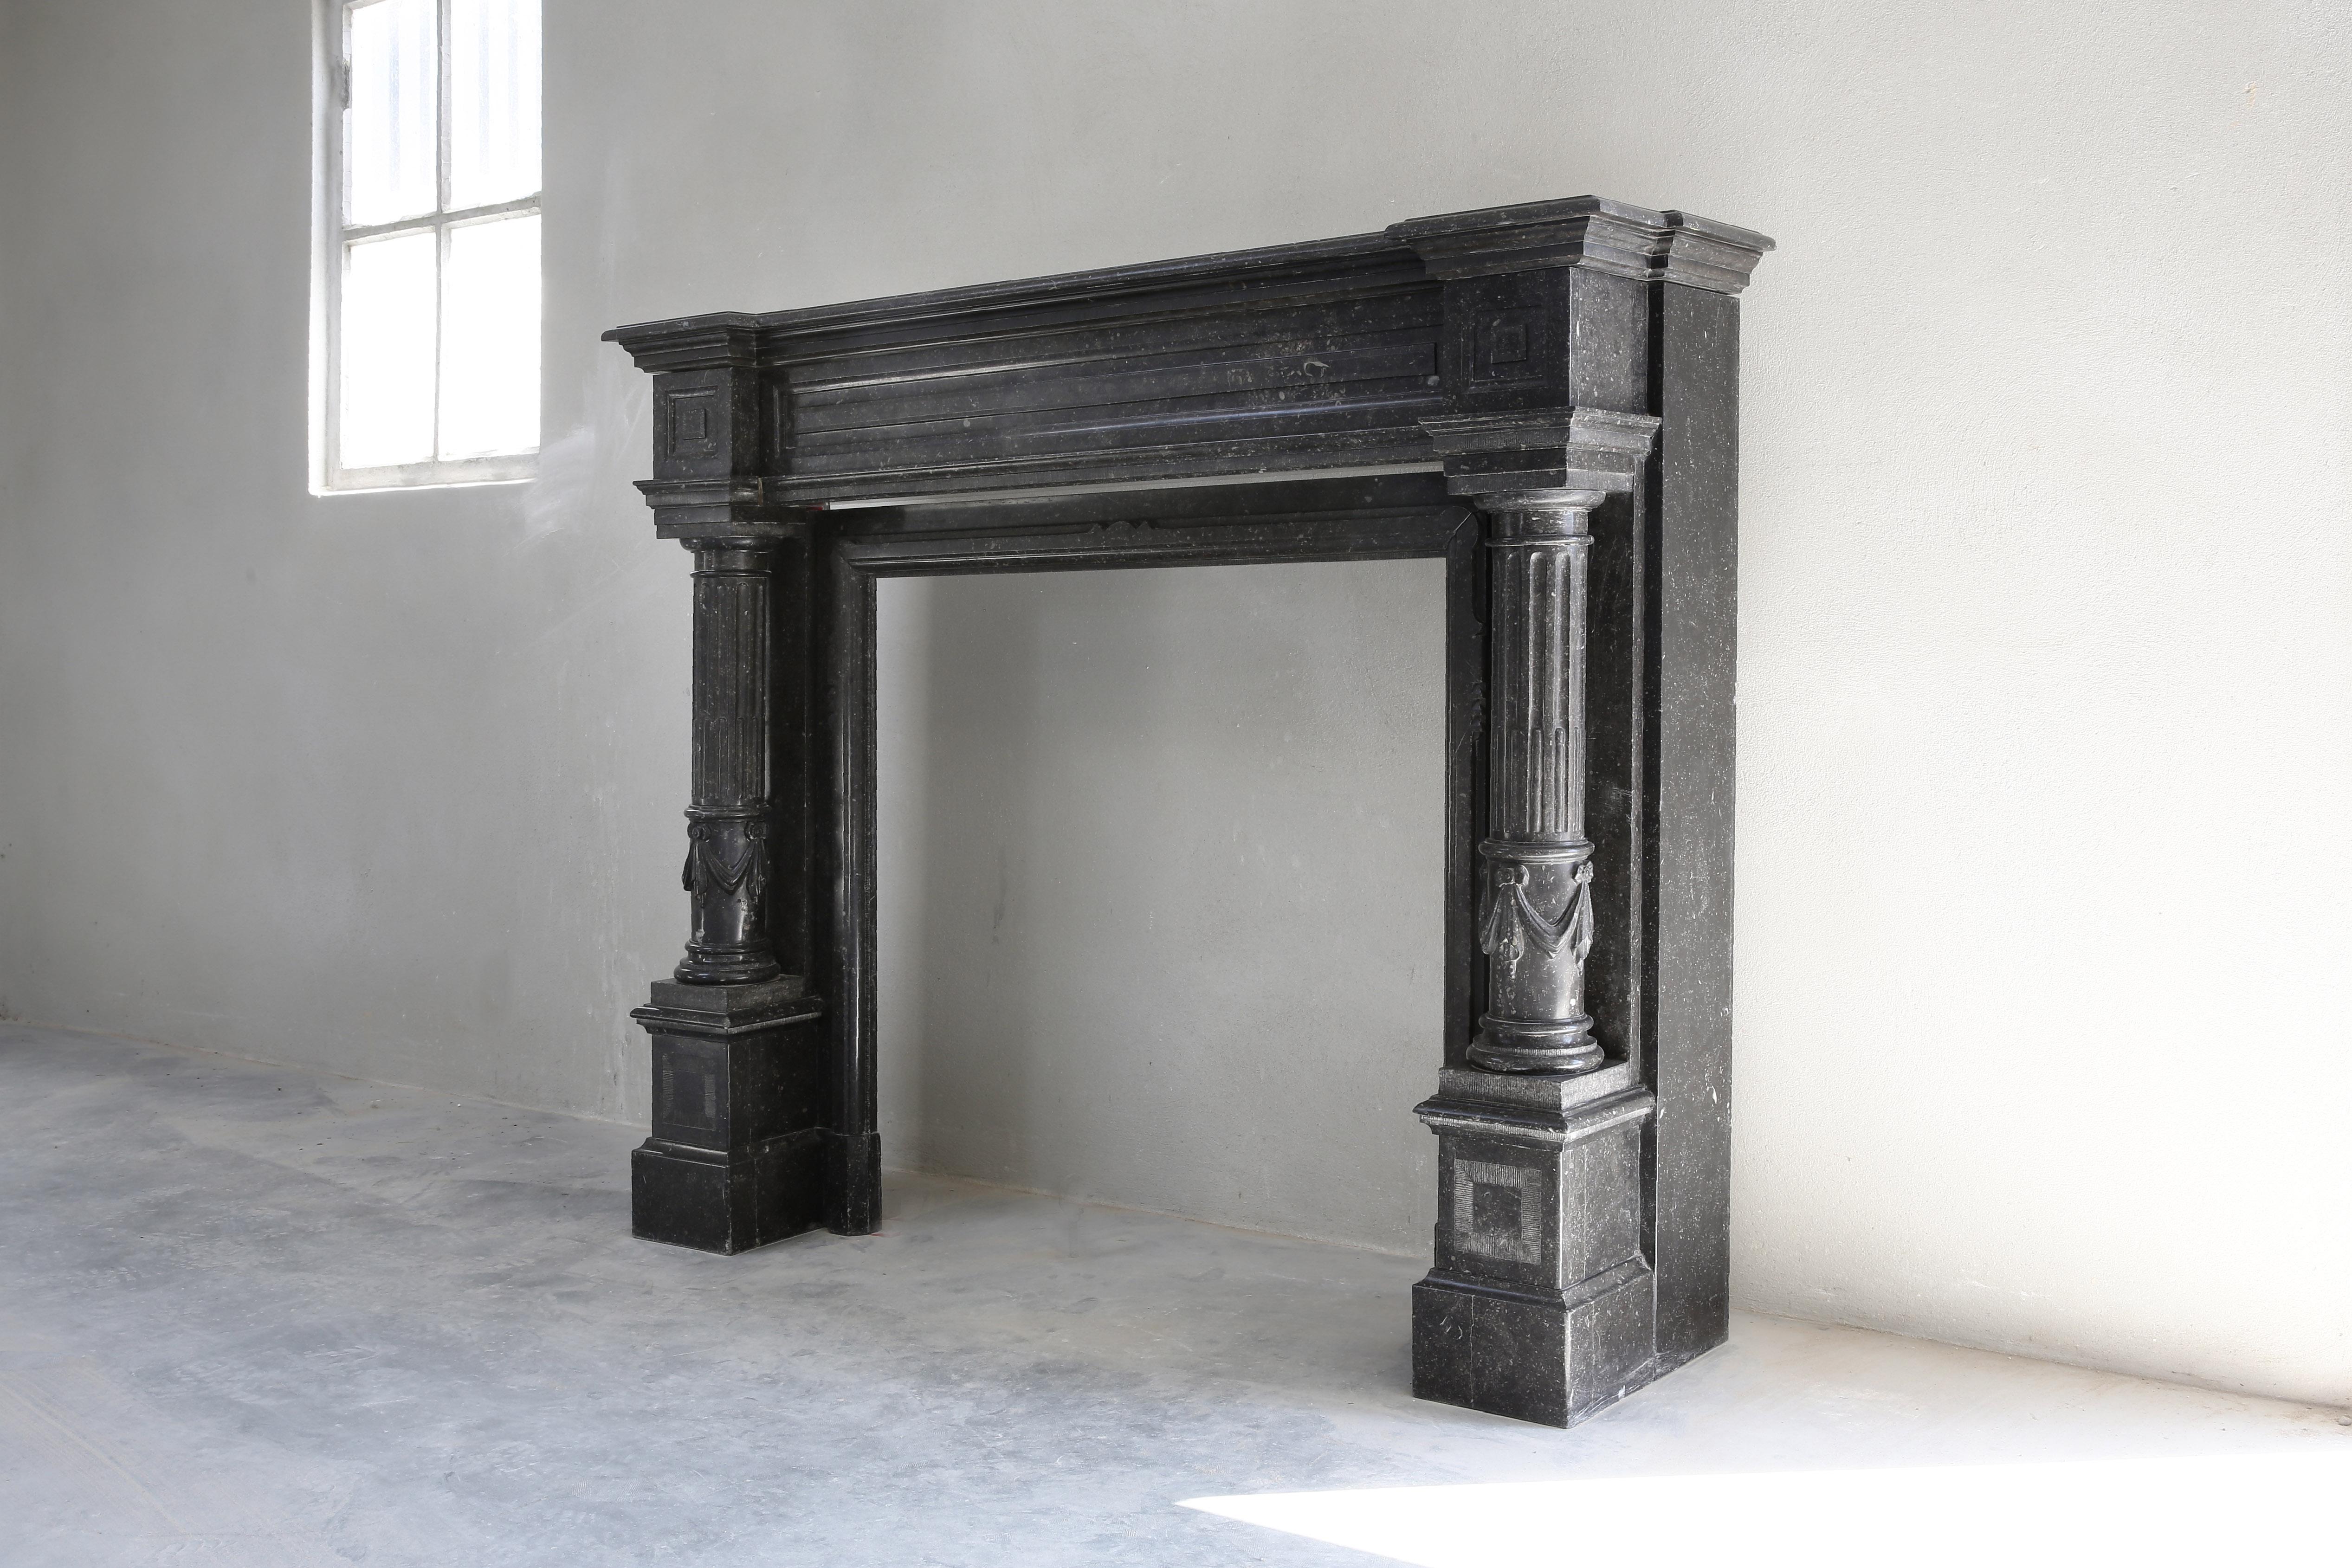 A special fireplace with many adaptations in the neoclassical style from the 19th century. The top has beautiful lines and various ornaments. The legs are partially round and equipped with flutes. A stately fireplace made of Belgian bluestone that